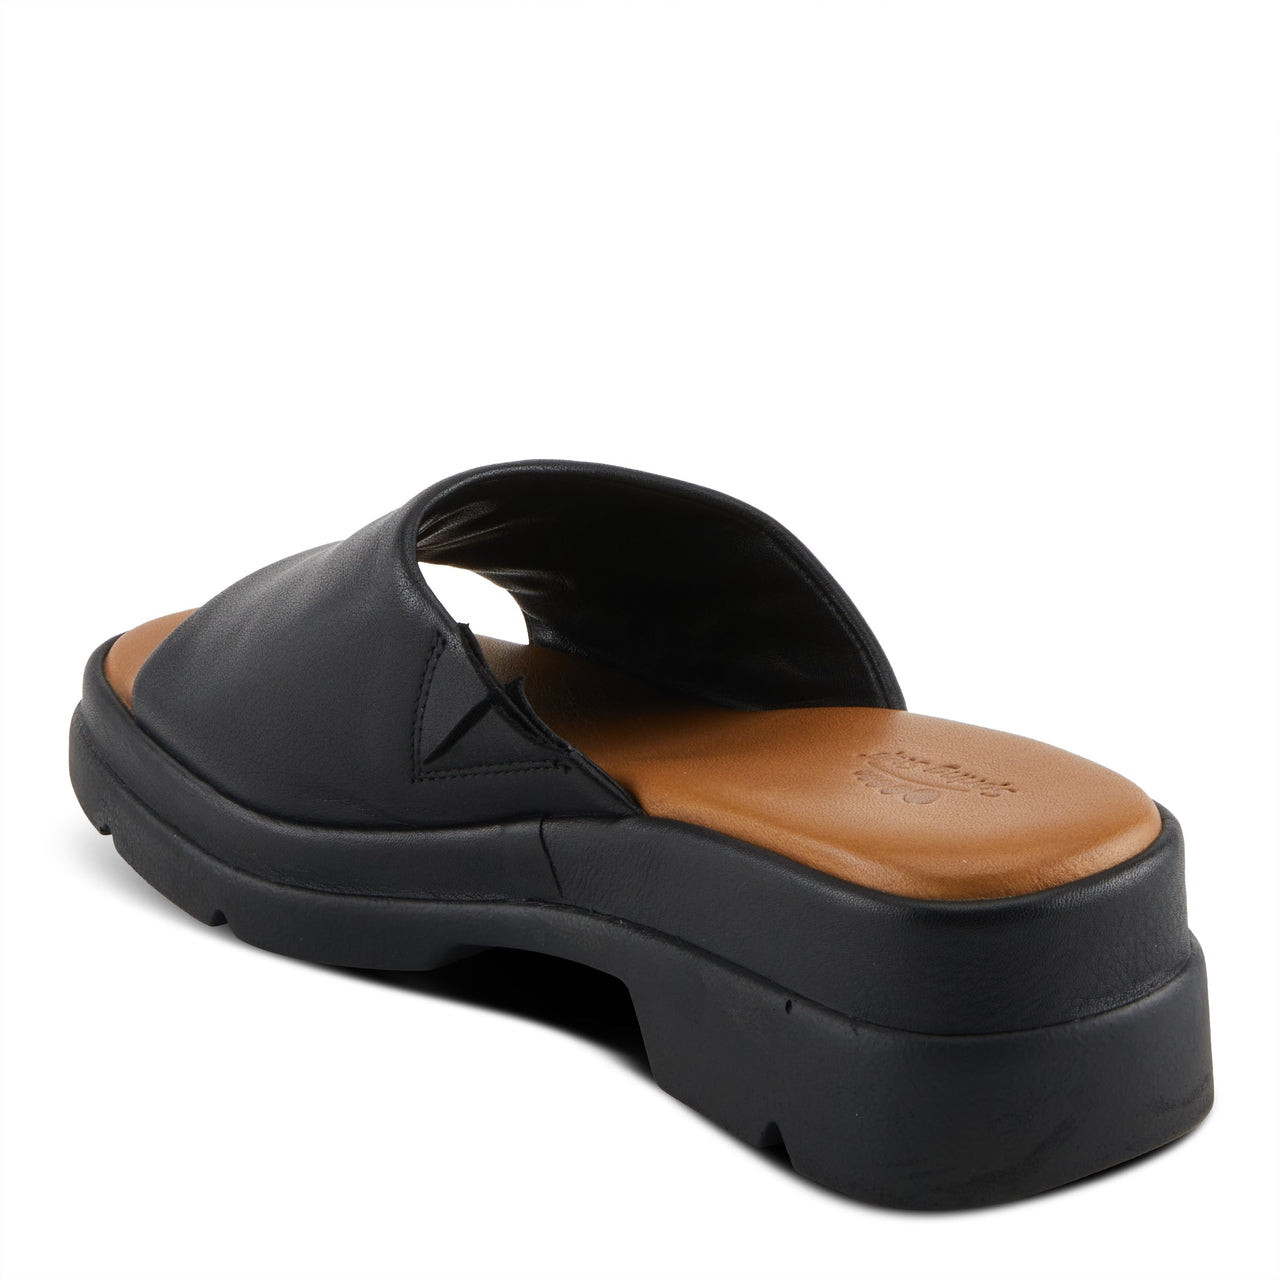 Black leather Spring Step Fireisland sandals with cushioned insole and adjustable strap